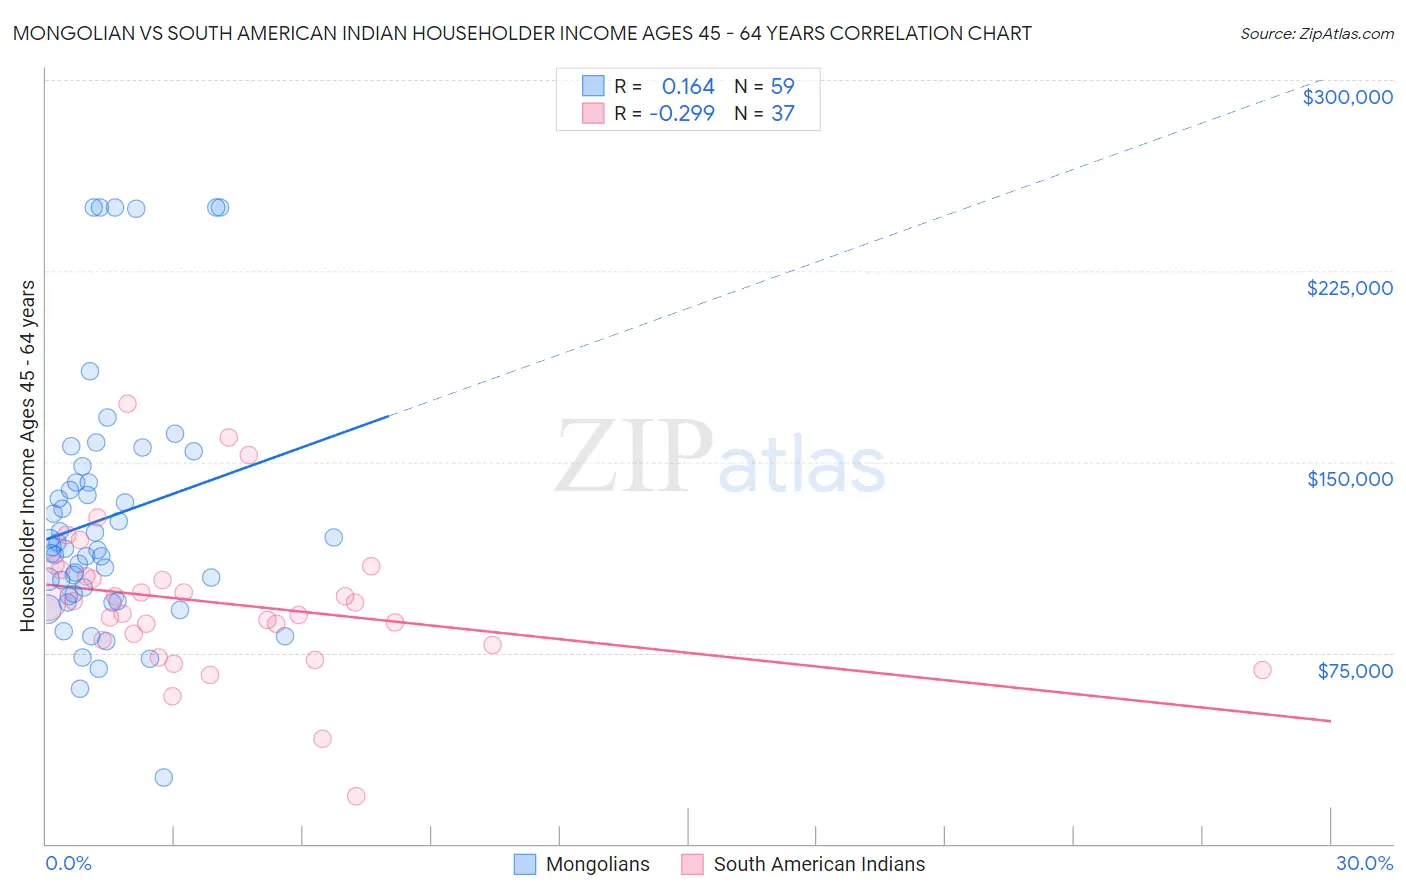 Mongolian vs South American Indian Householder Income Ages 45 - 64 years